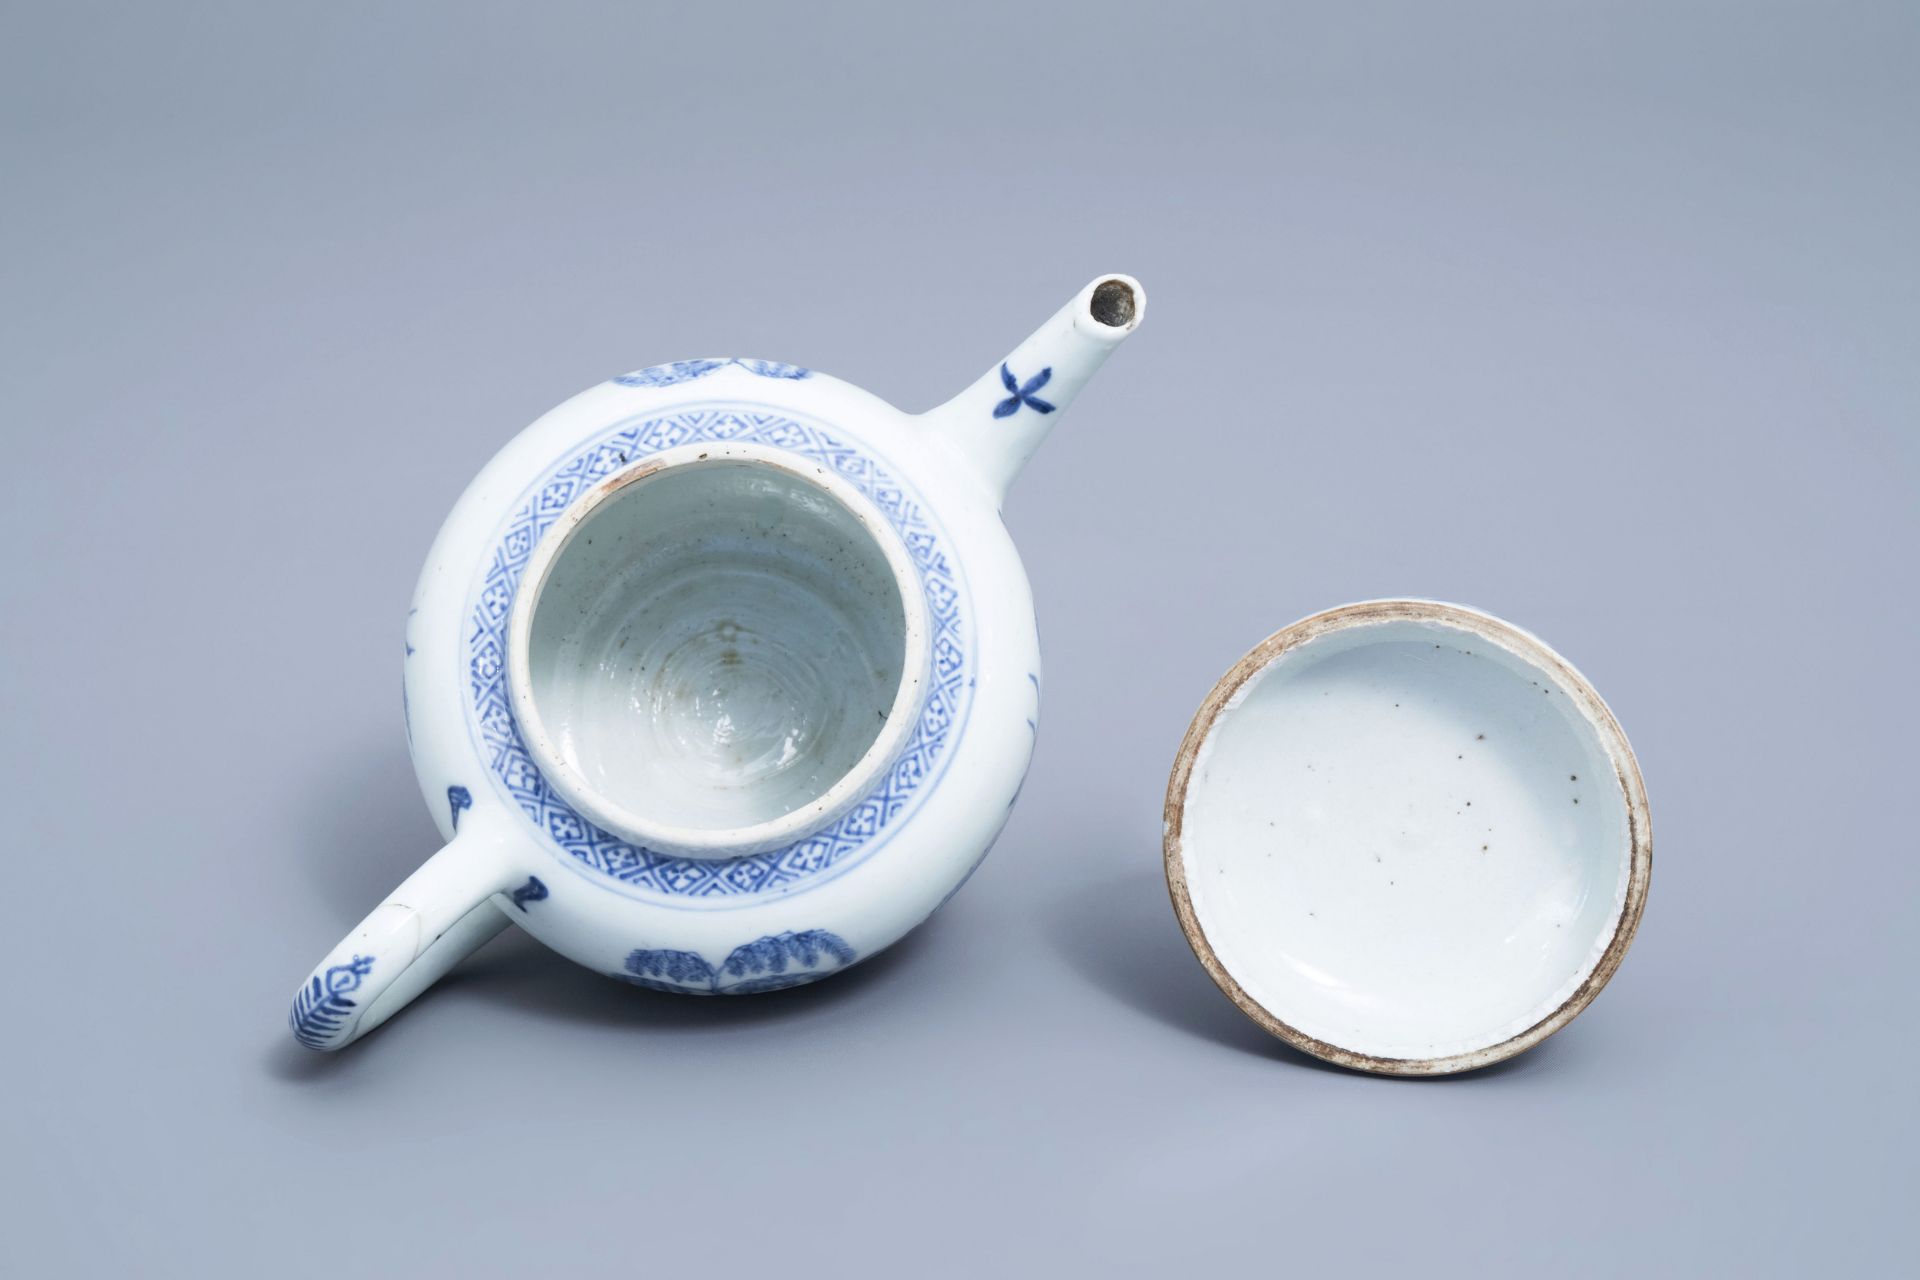 A varied collection of Chinese blue and white porcelain, 18th C. and later - Image 15 of 54